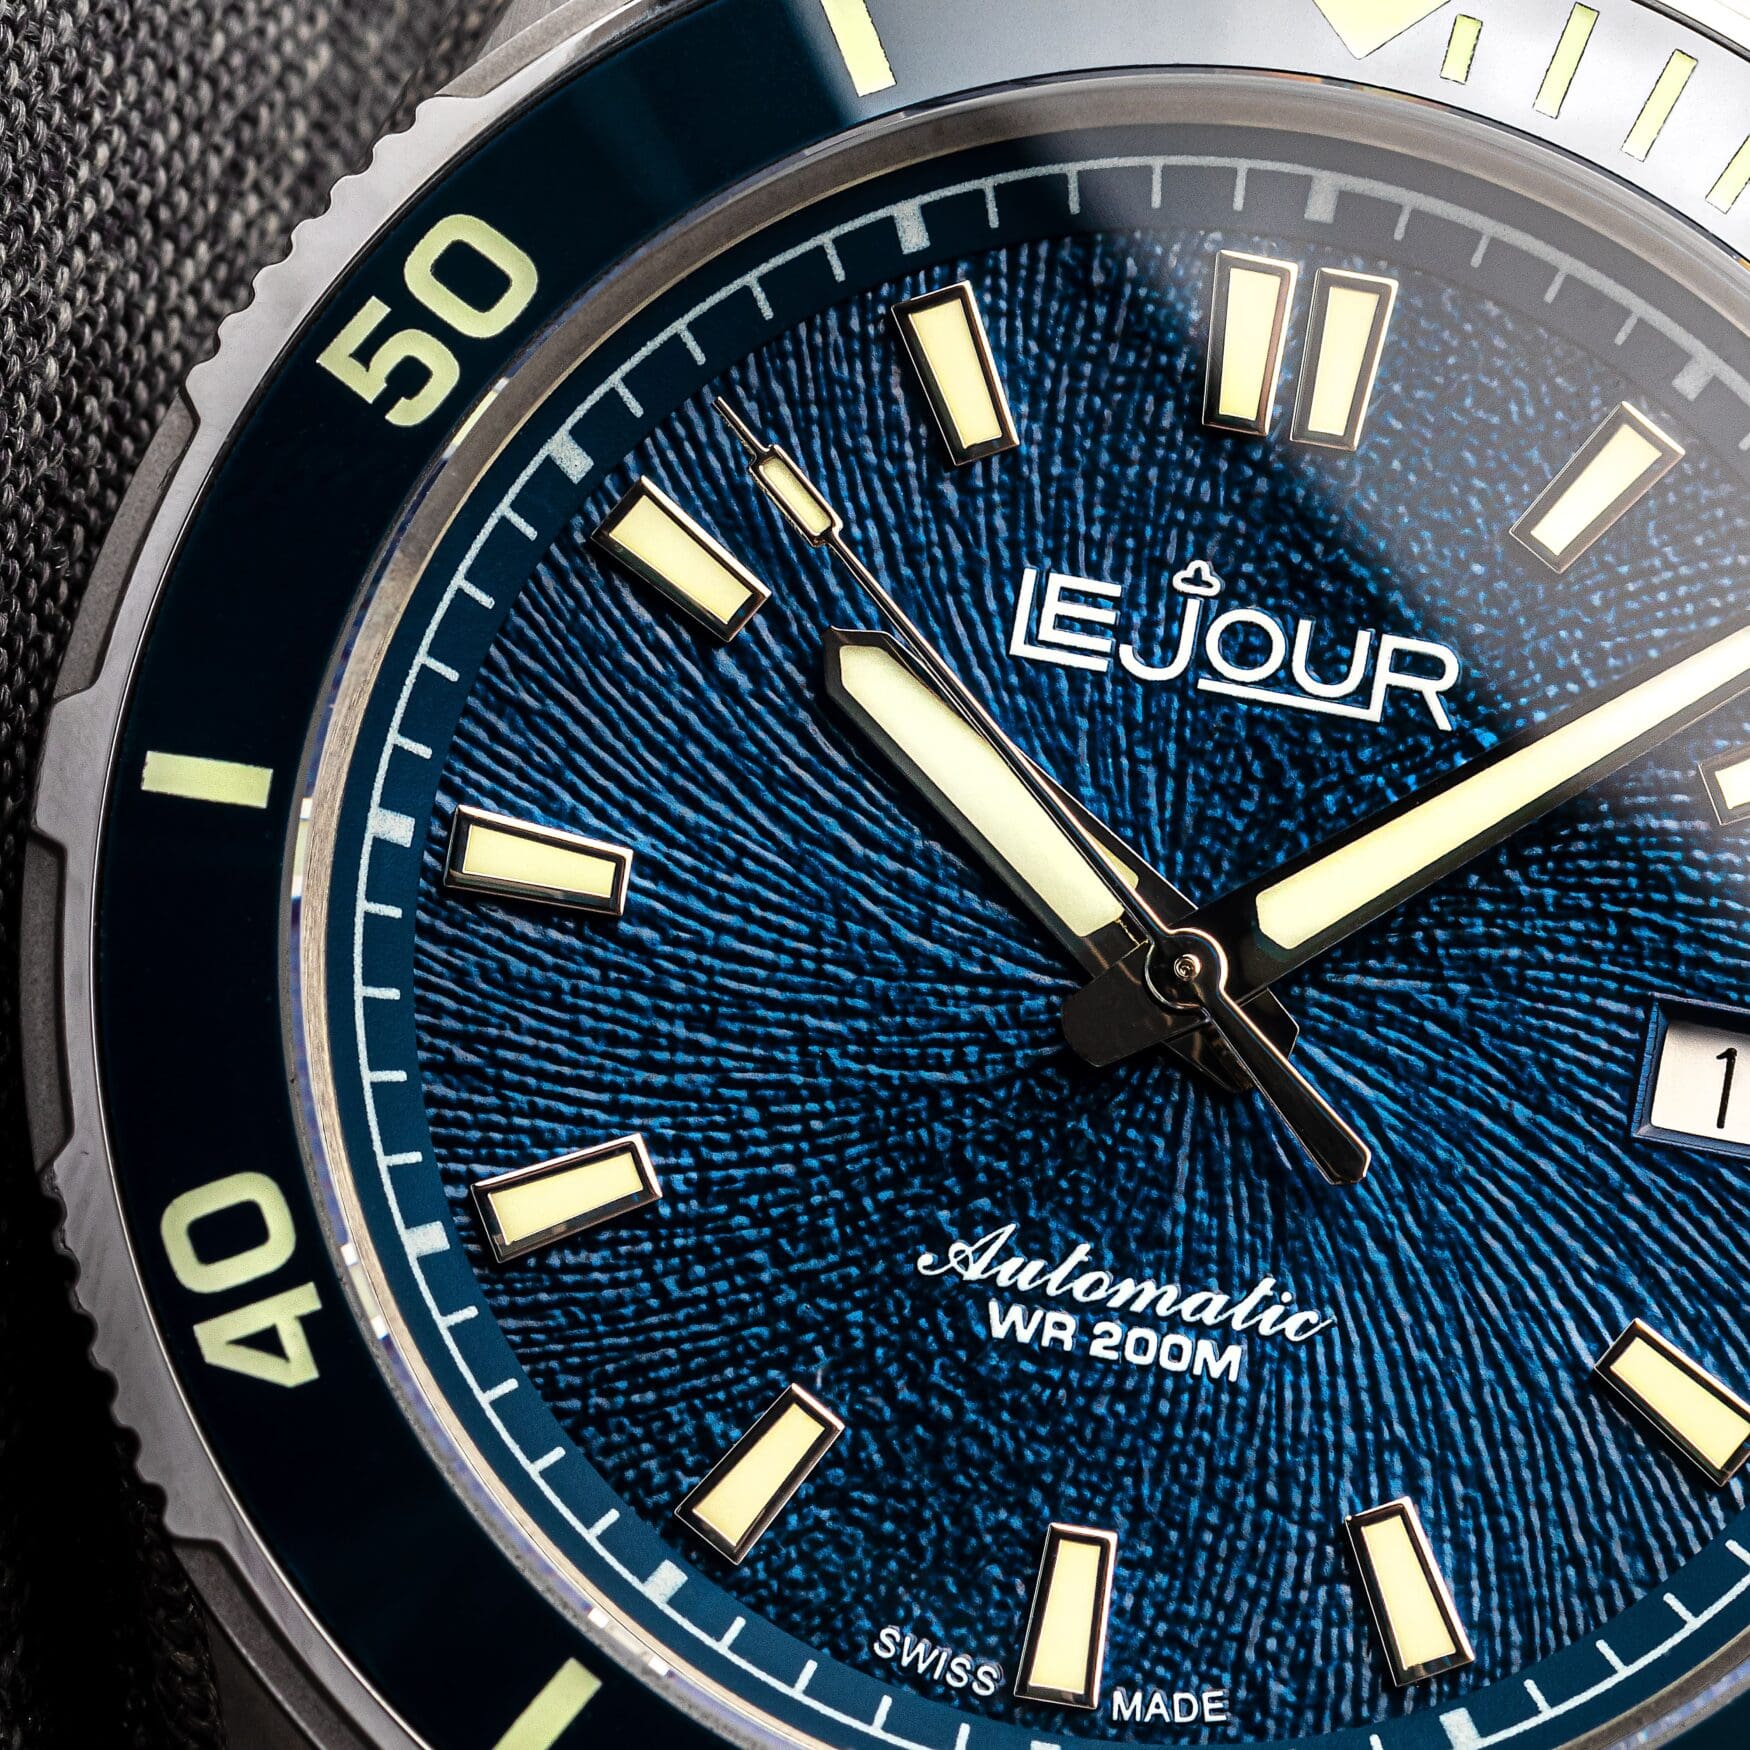 IN-DEPTH: The LeJour Coral Diver – vintage notes with unique twists at an attainable cost